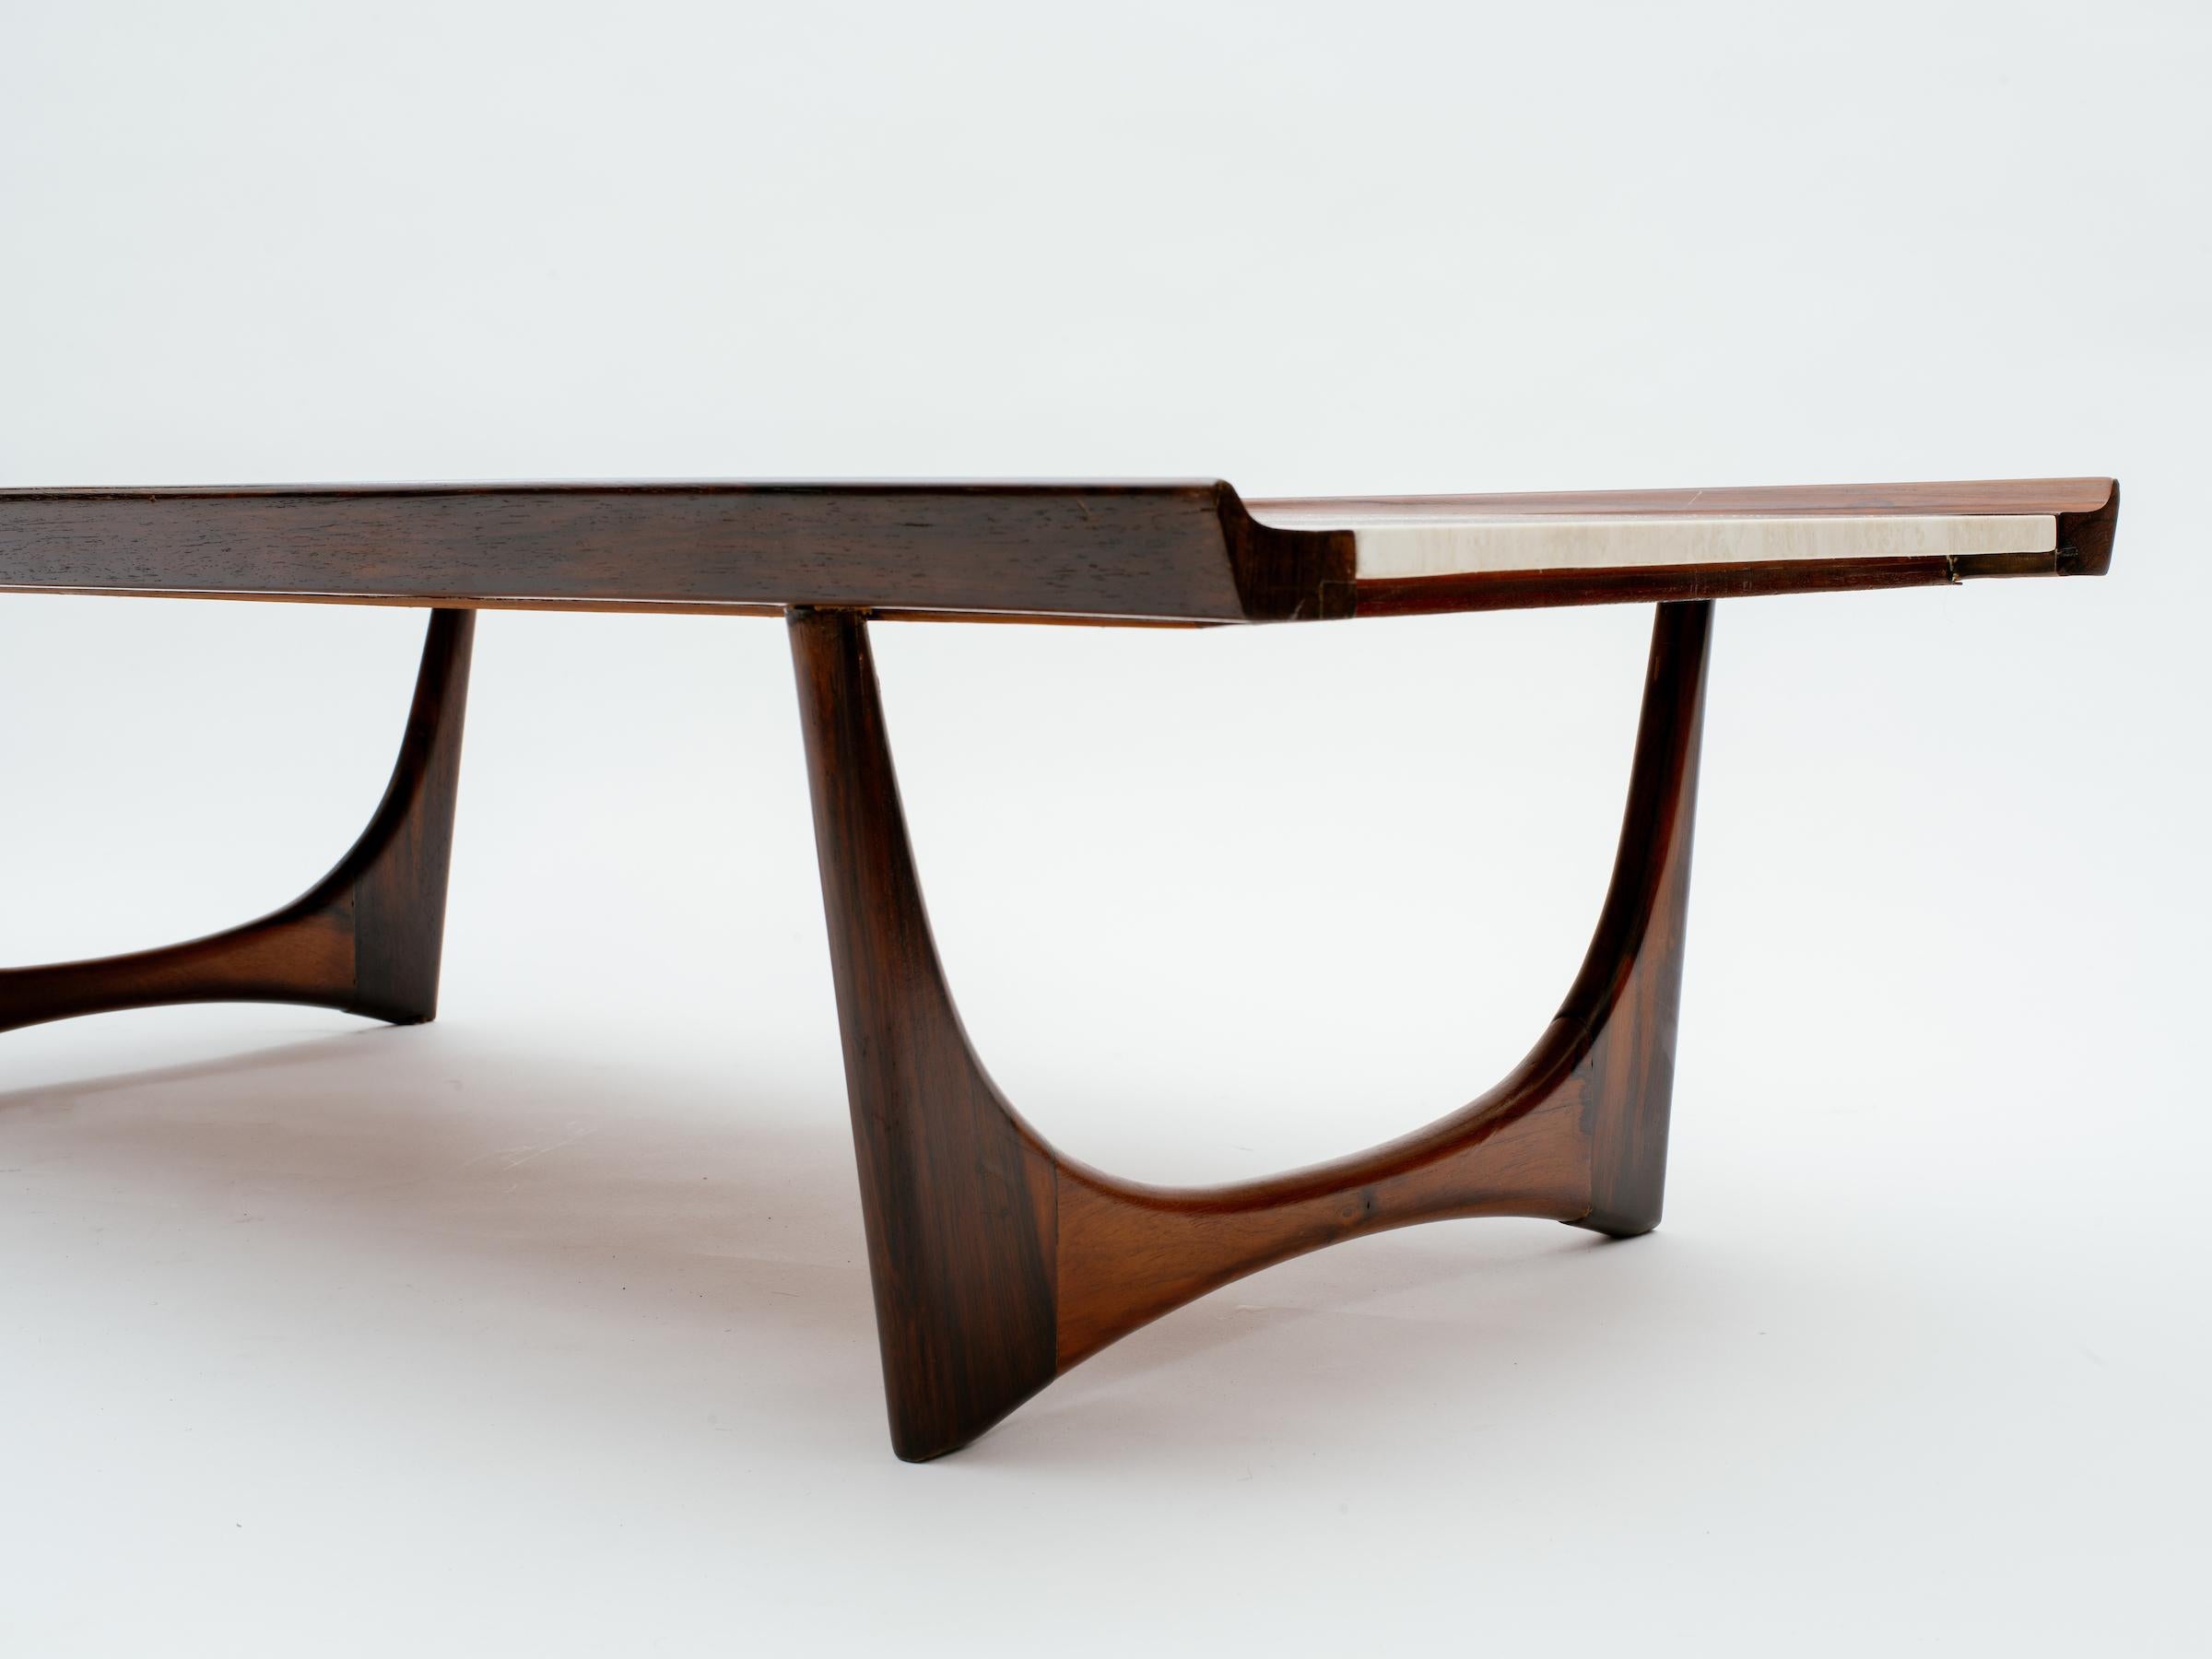 Carved Giuseppe Scapinelli Brazilian Rosewood and Travertine Coffee Table